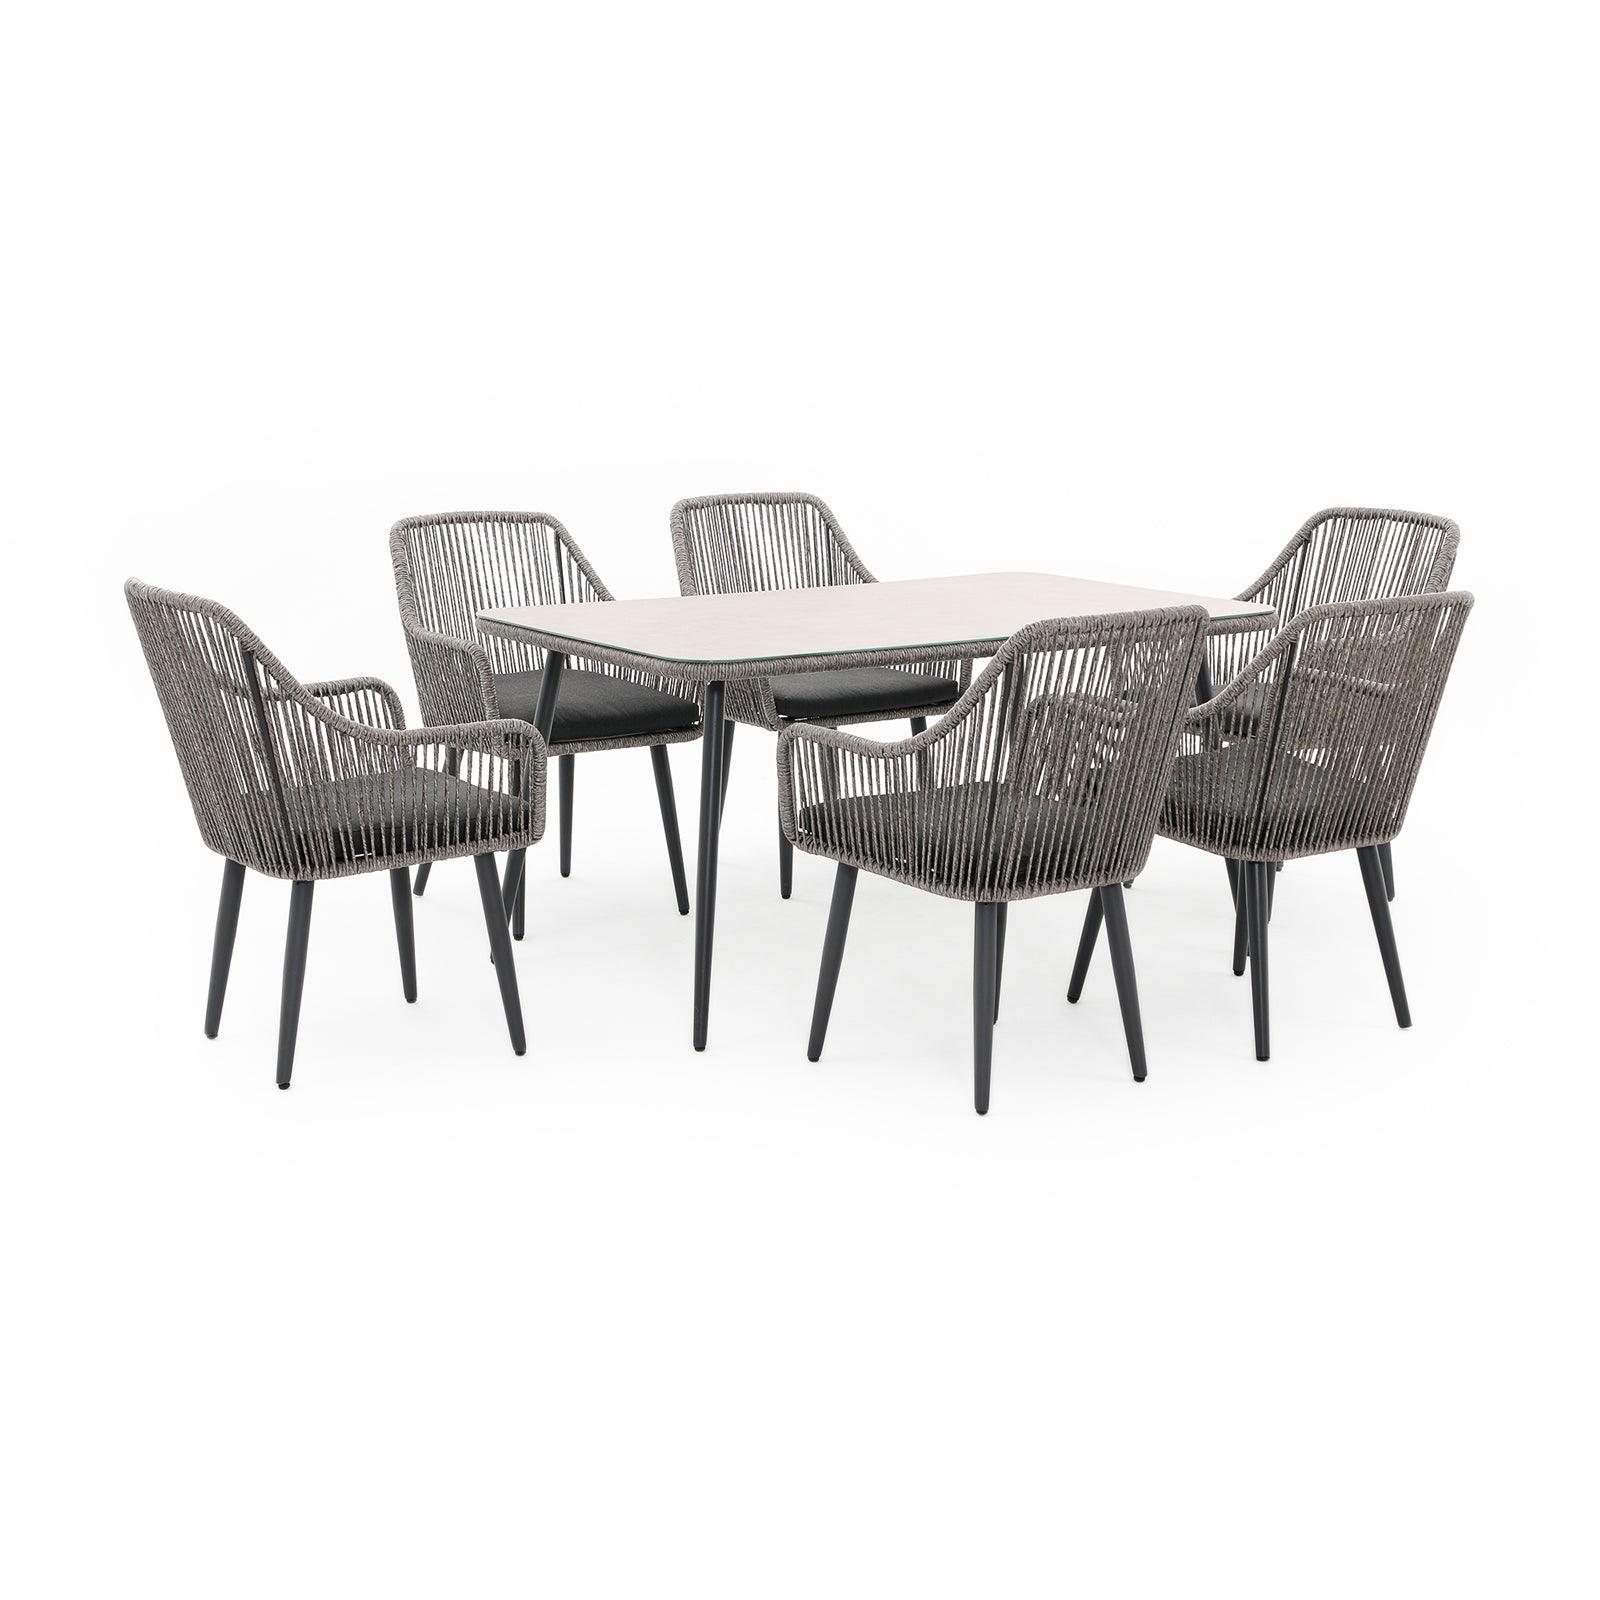 Hallerbos Modern Wicker Outdoor Furniture, grey 6-person Outdoor Dining Set with steel frame, grey cushion, 1 rectangle Dining Table with Tempered Glass top, 6 dining chairs - Jardina Furniture#Color_Grey